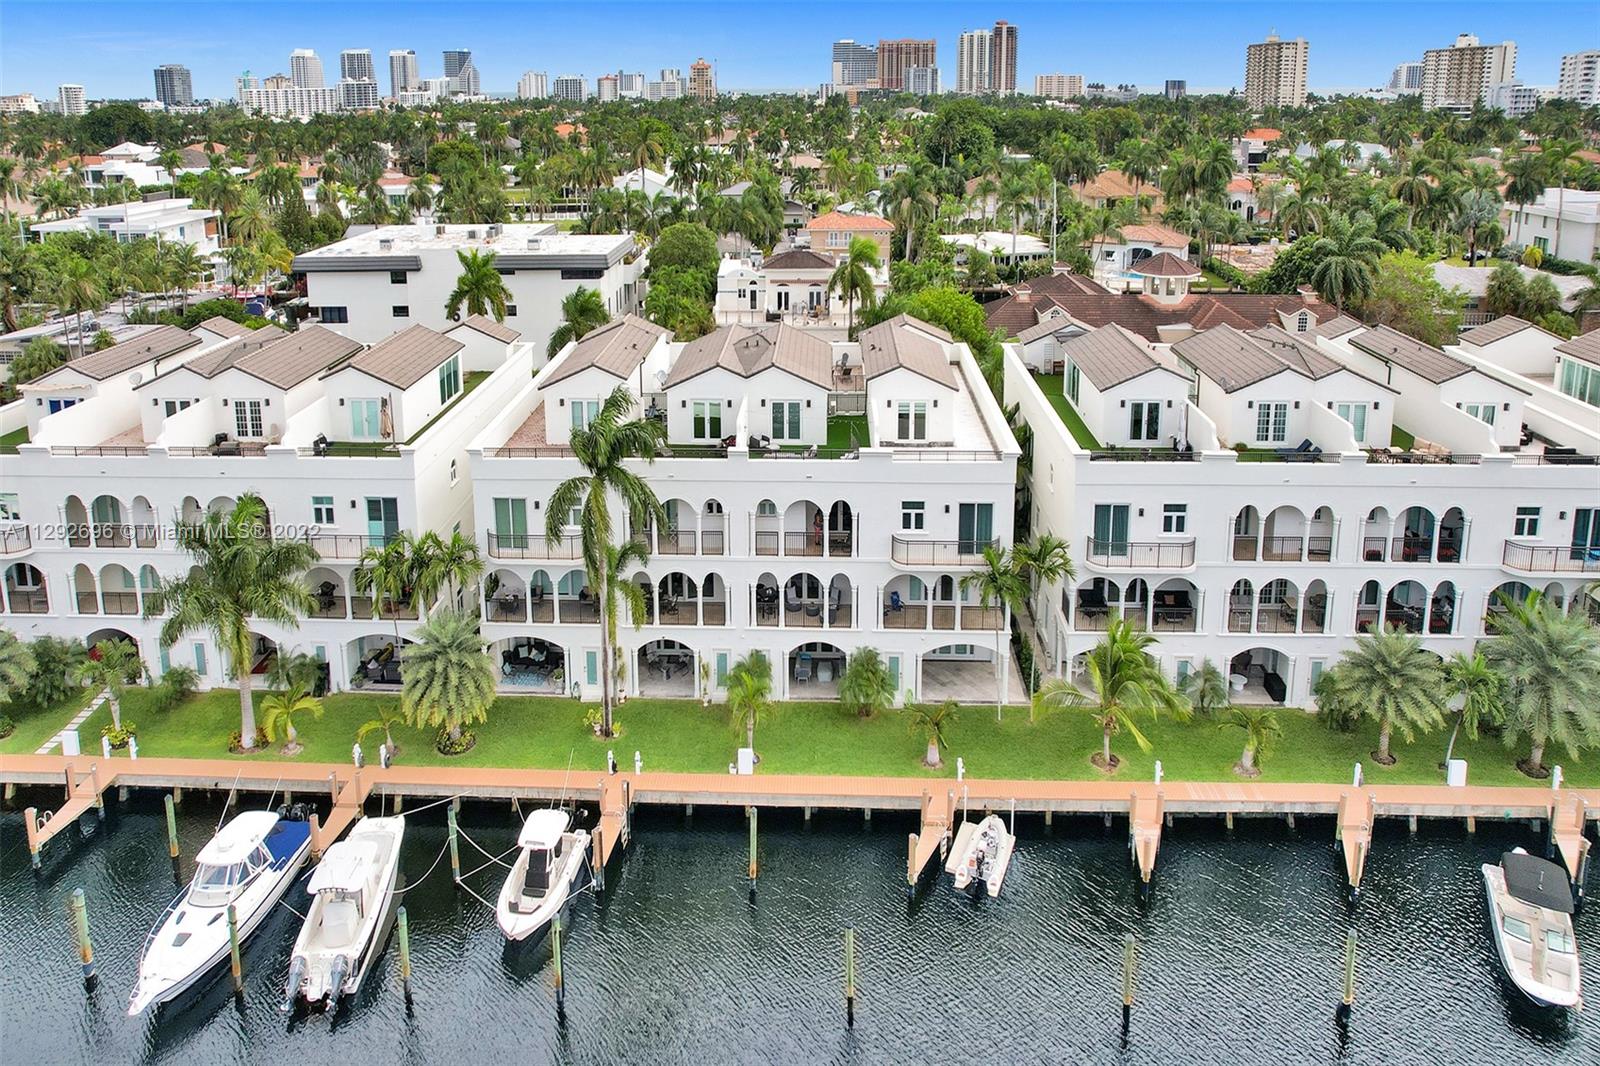 WATERFRONT, FEE SIMPLE TOWNHOUSE. 3763 SF, PRIVATE DOCK! Enjoy the Las Olas lifestyle in this spacious townhouse with a deeded dock for up to a 52' boat. Gourmet kitchen, high end appliances, wall oven, rooftop terrace, two car garage, loft and den. Enjoy amazing waterfront views from two balconies. Large master bedroom with walk in closets and enormous master bathroom with dual sinks, and separate tub and shower. High ceilings, impact windows and doors, marble and wood floors through out, private gated driveway, two laundry facilities and elevator. Extensive exterior upgrades have just been completed. This home has everything for a price that cannot be matched on the Las Olas Isles. Minutes to Intracoastal waterway, las olas, the beach, airport, and mall.